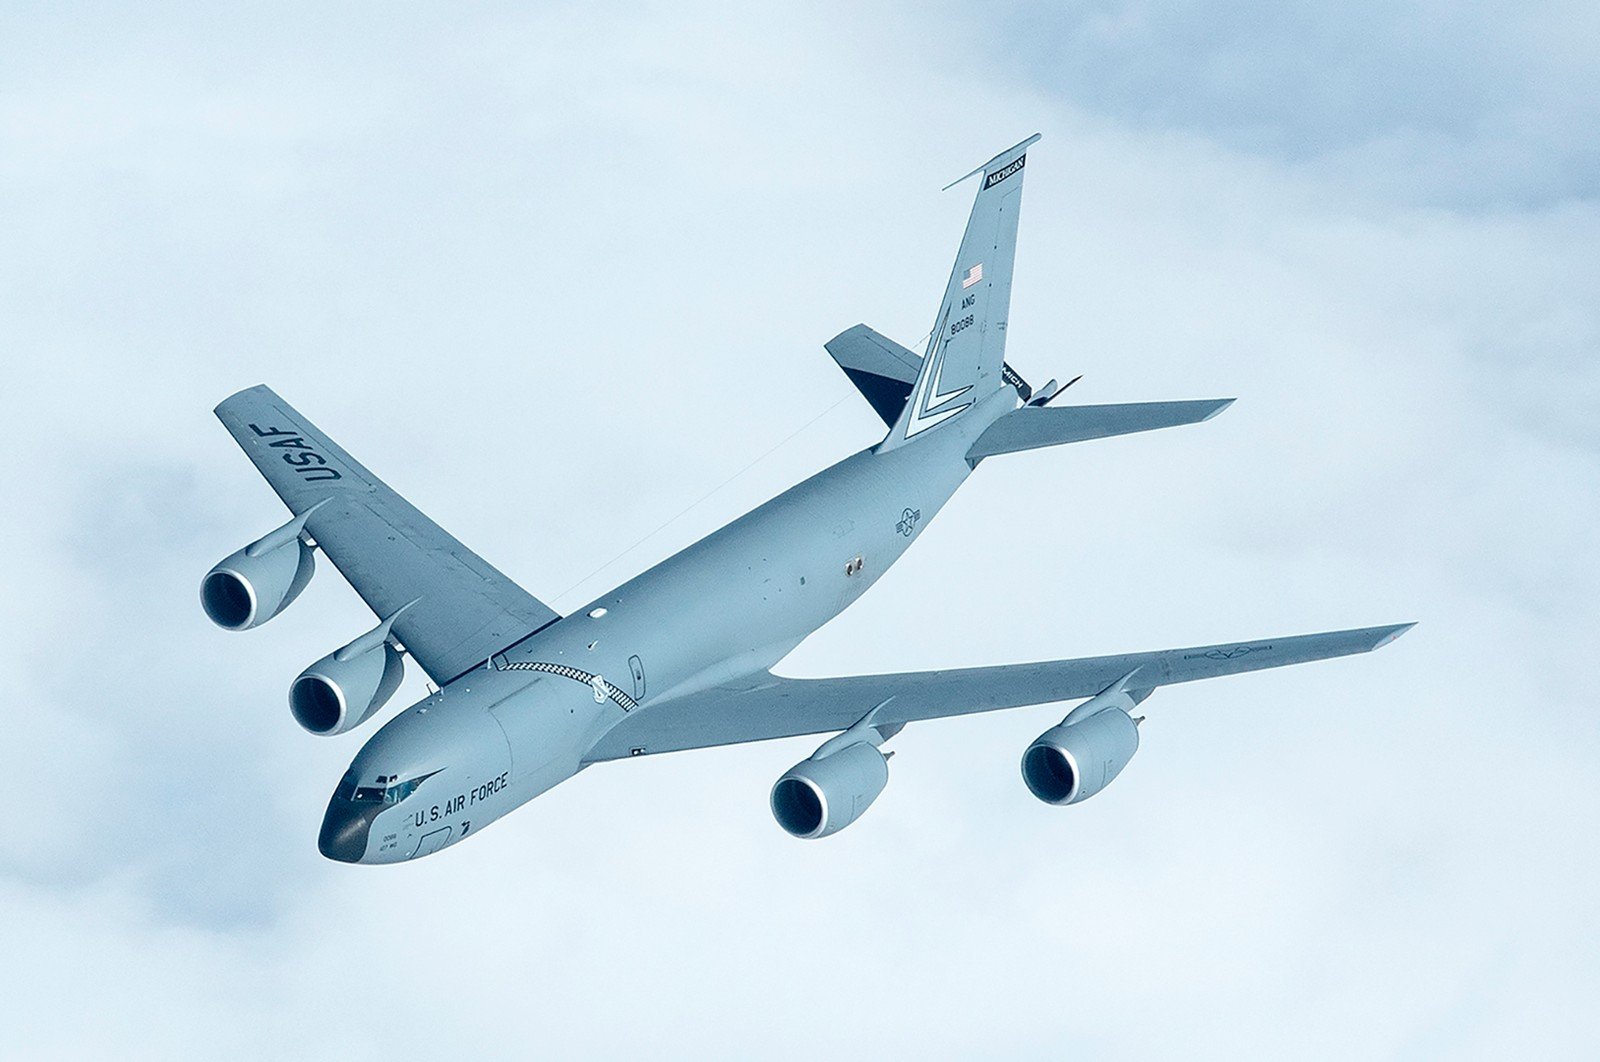 A Michigan Air National Guard KC-135T from the 171st Air Refueling Squadron at Selfridge ANG Base in flight on a refueling mission over central United States. The KC-135 is used for refueling other aircraft in mid-air across the globe. It has a secondary mission as a transport aircraft, moving personnel and equipment. To learn more about Selfridge and to walk inside the KC-135 Stratotanker yourself, visit the Selfridge International Open House and Air Show June 6 &amp; 7. (U.S. Air National Guard photo by Munnaf Joarder)
